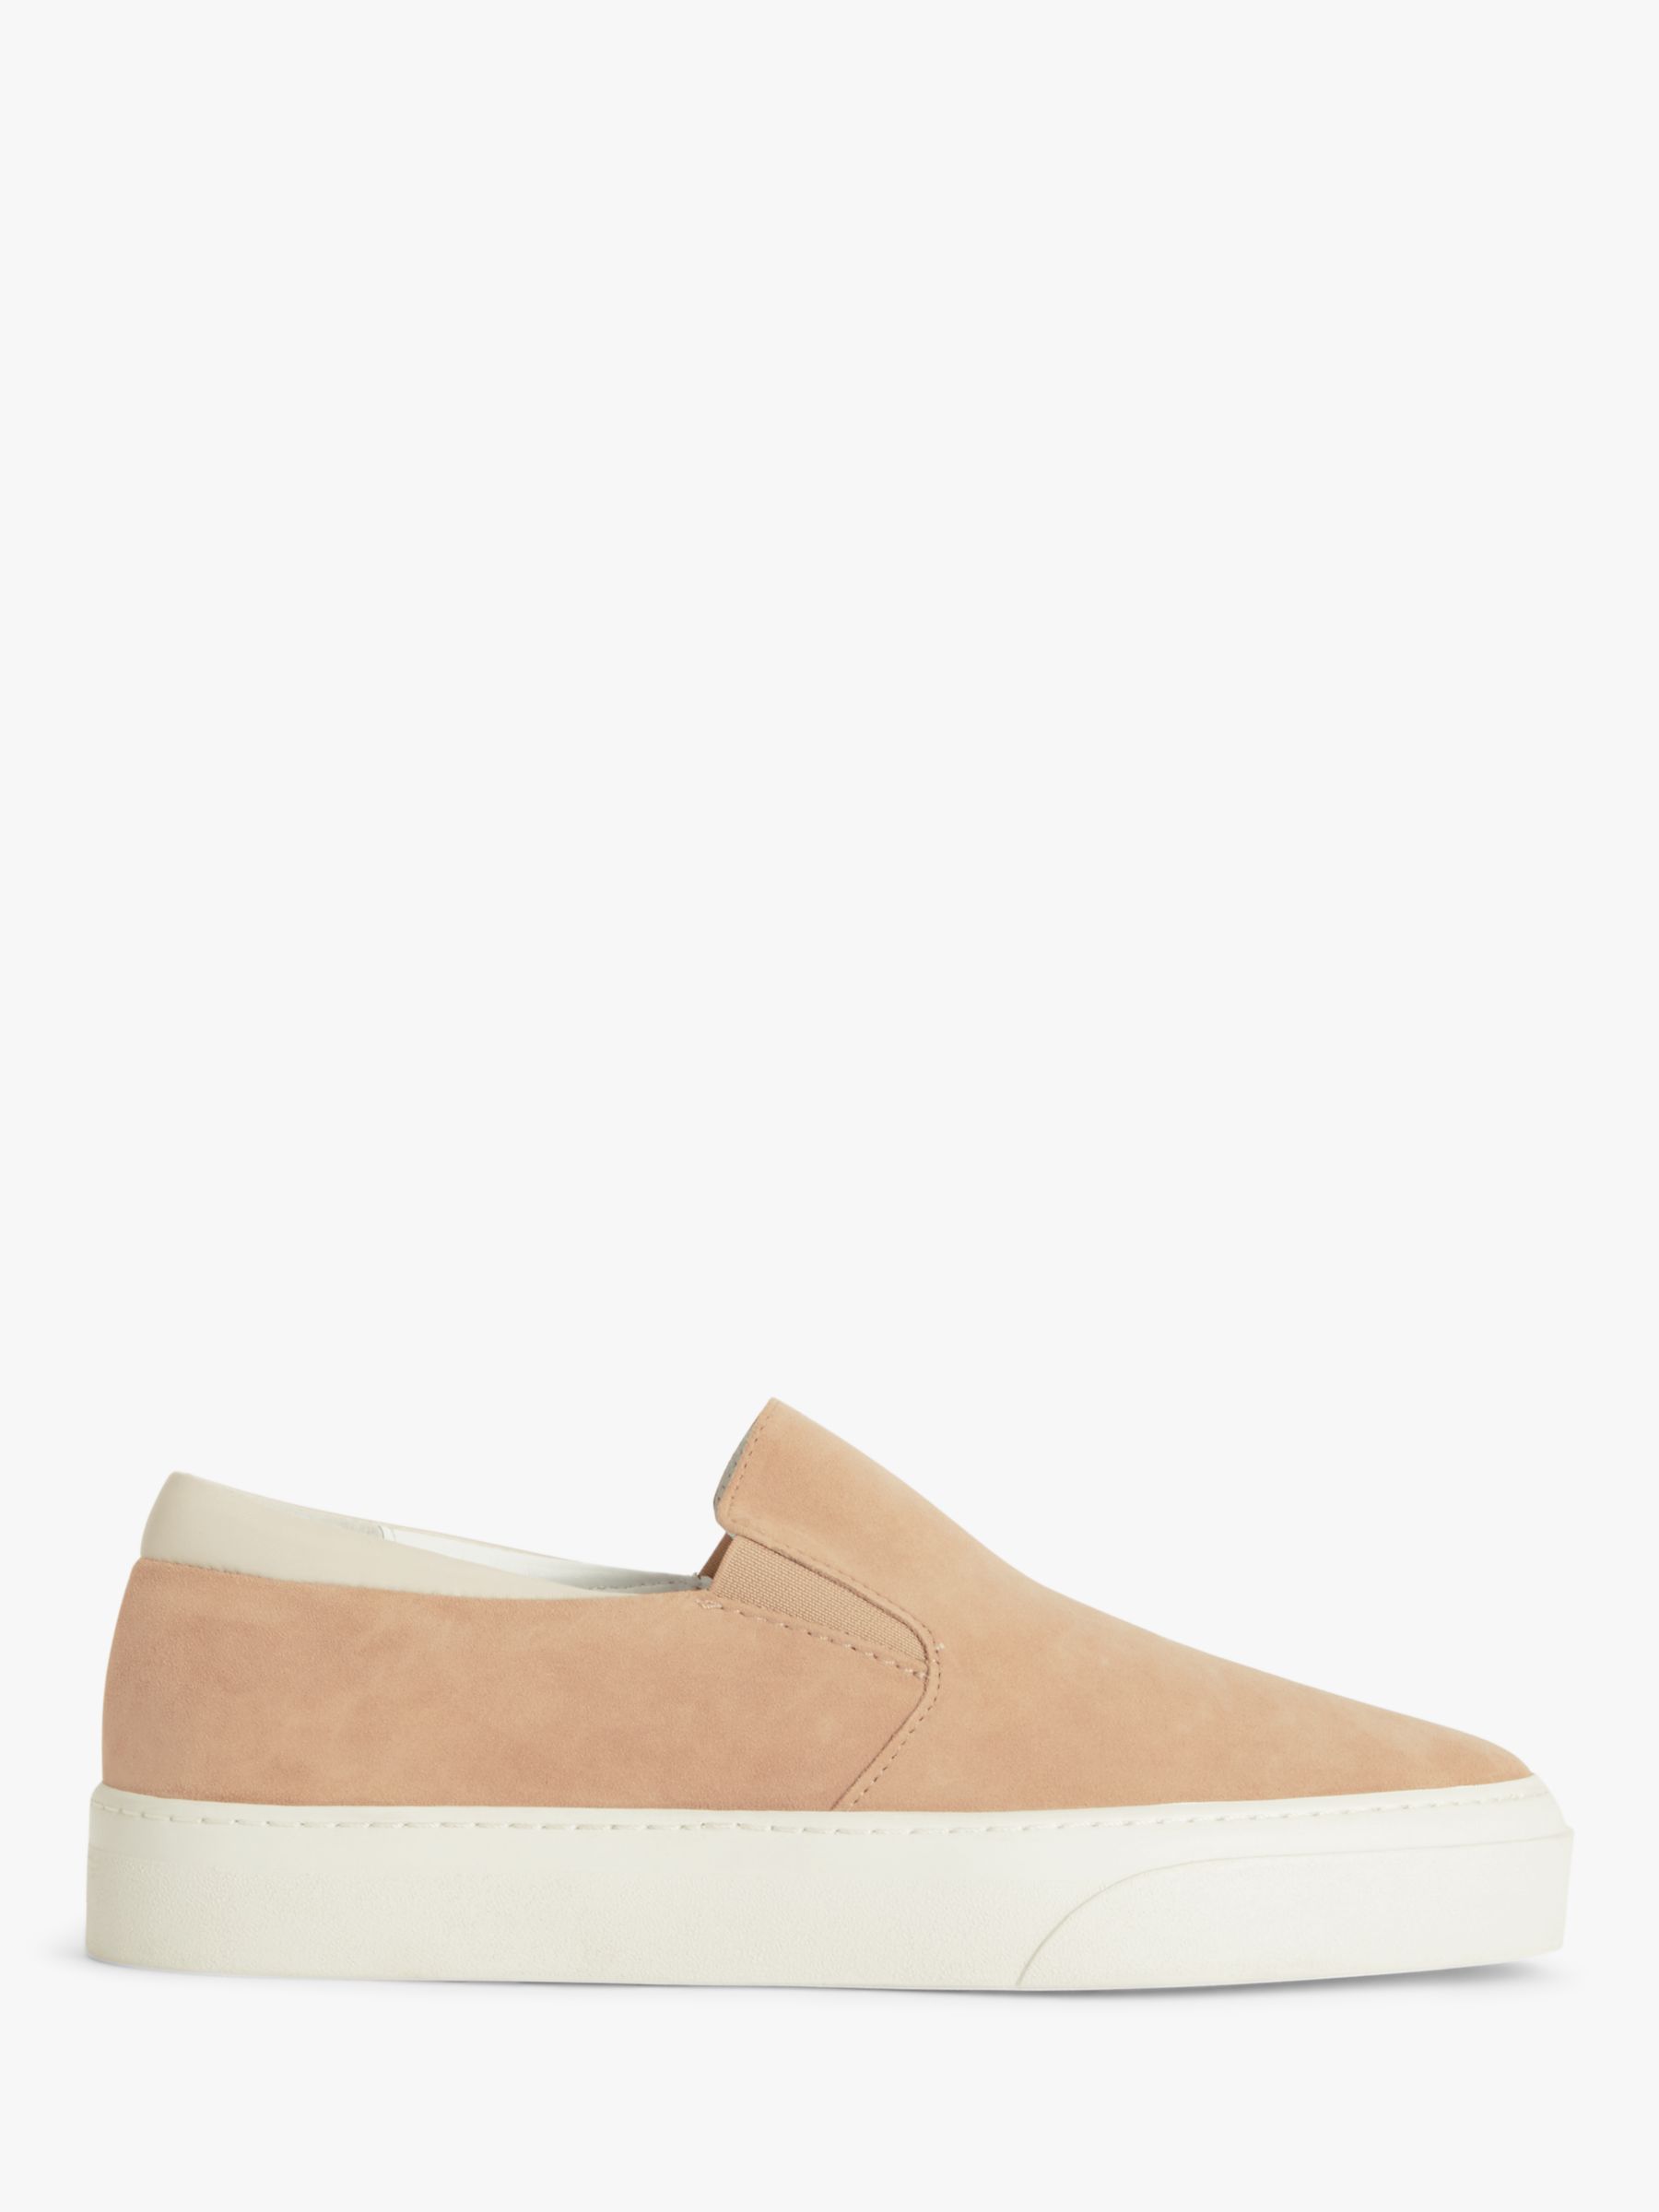 Kin Eli Suede Slip On Trainers, Taupe, 3